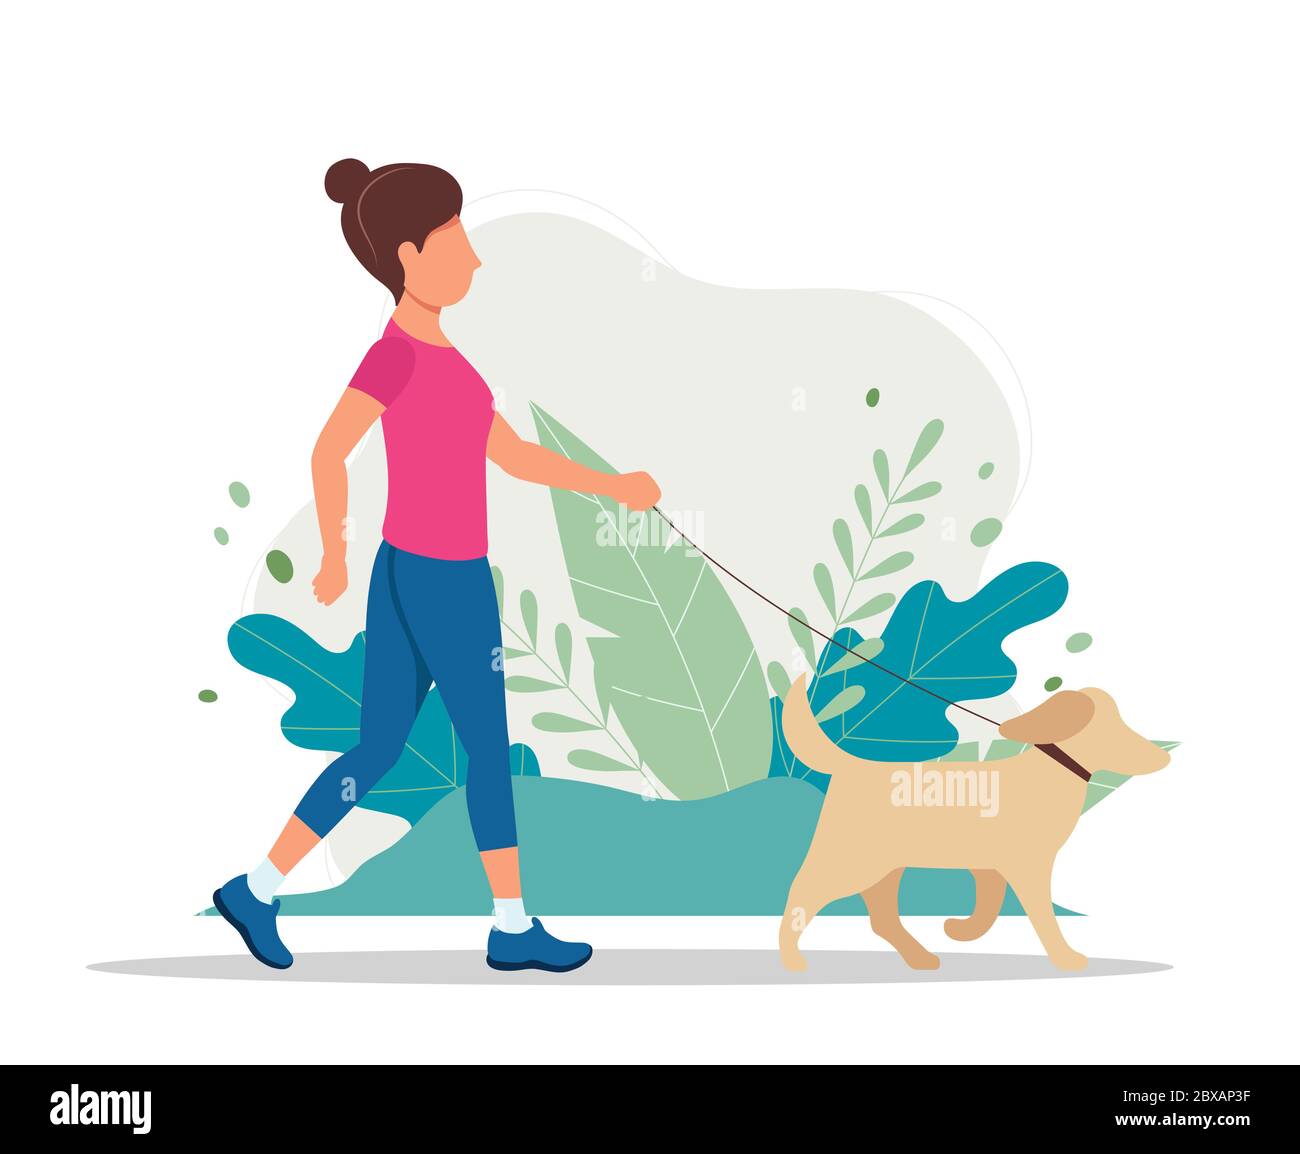 Woman with a dog in the park. Vector illustration in flat style, concept illustration for healthy lifestyle, sport, exercising. Stock Vector